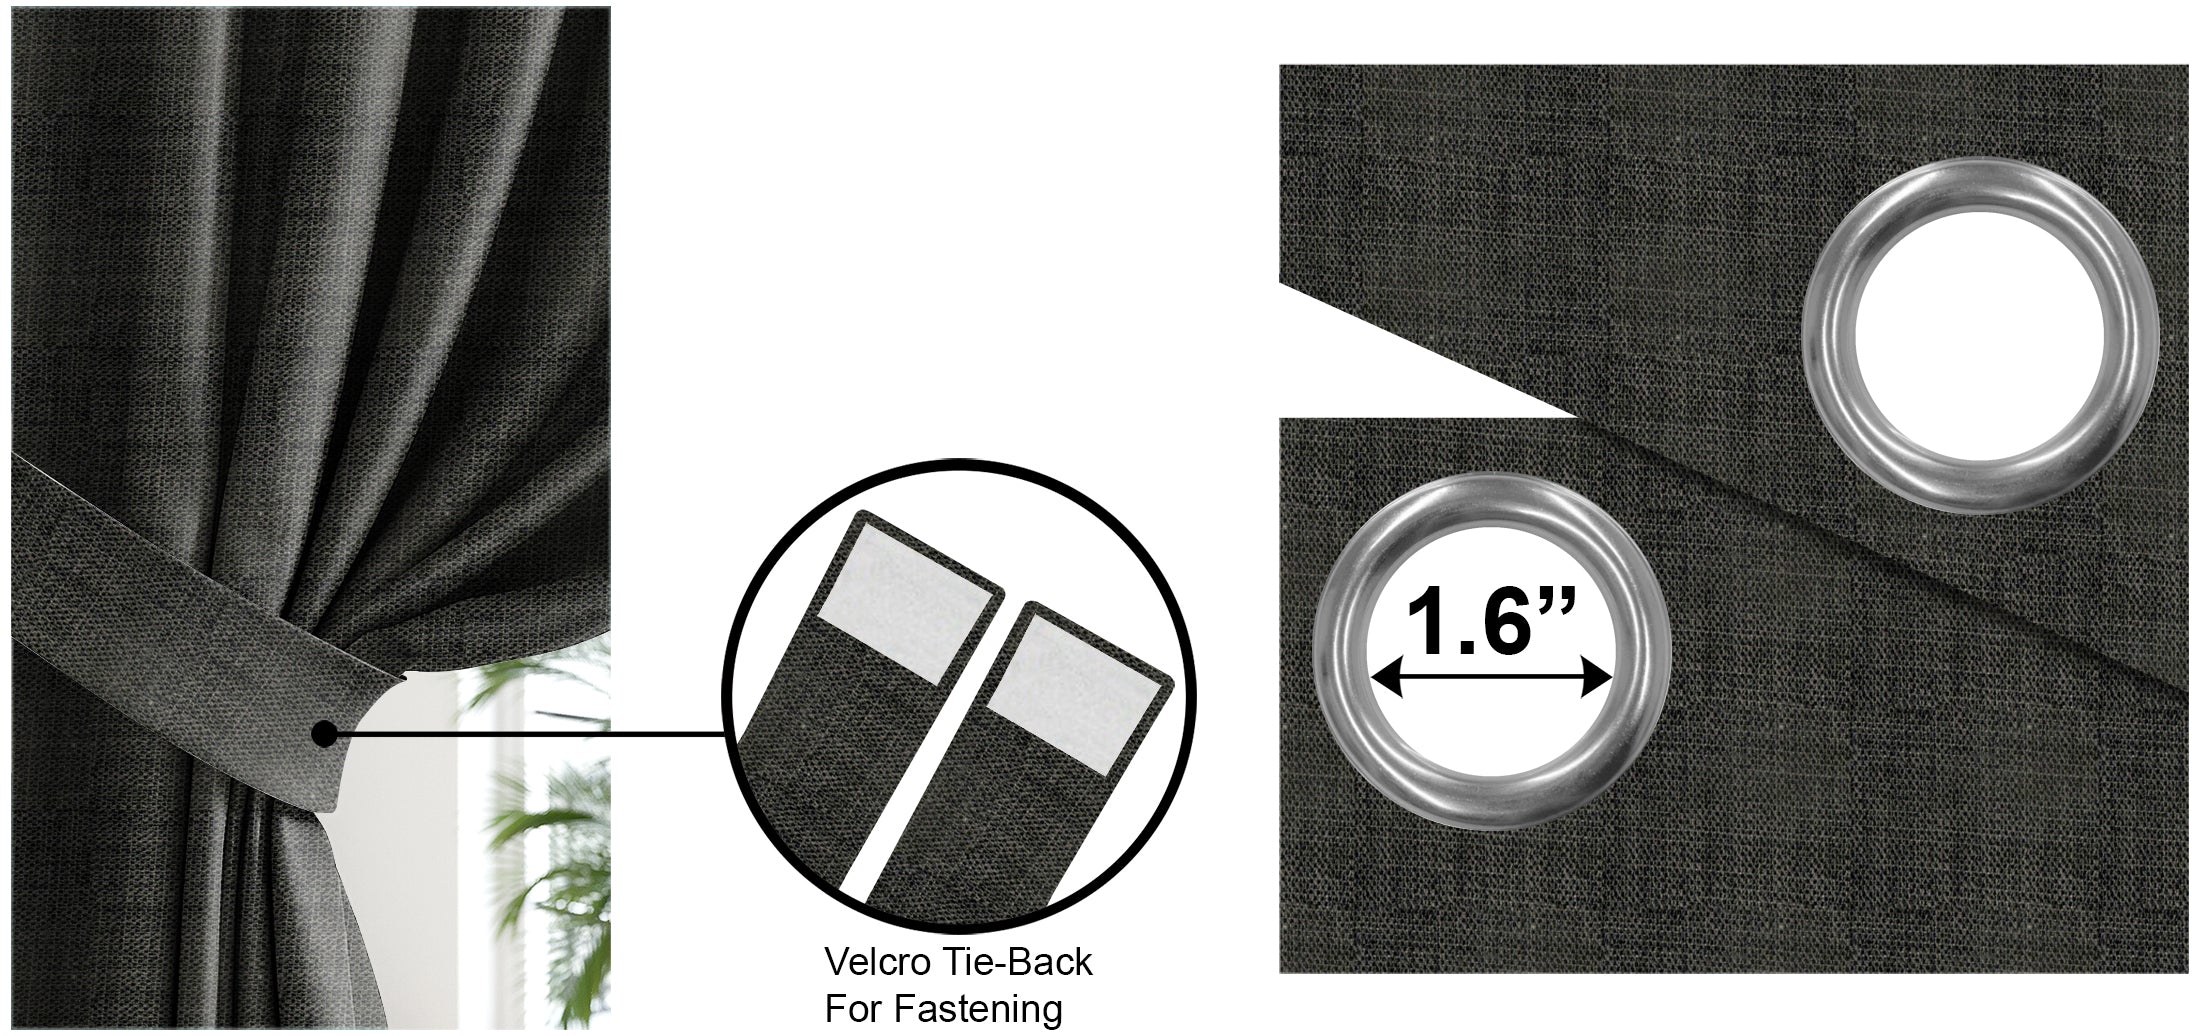 DELUXE BLACK BLACKOUT CURTAIN